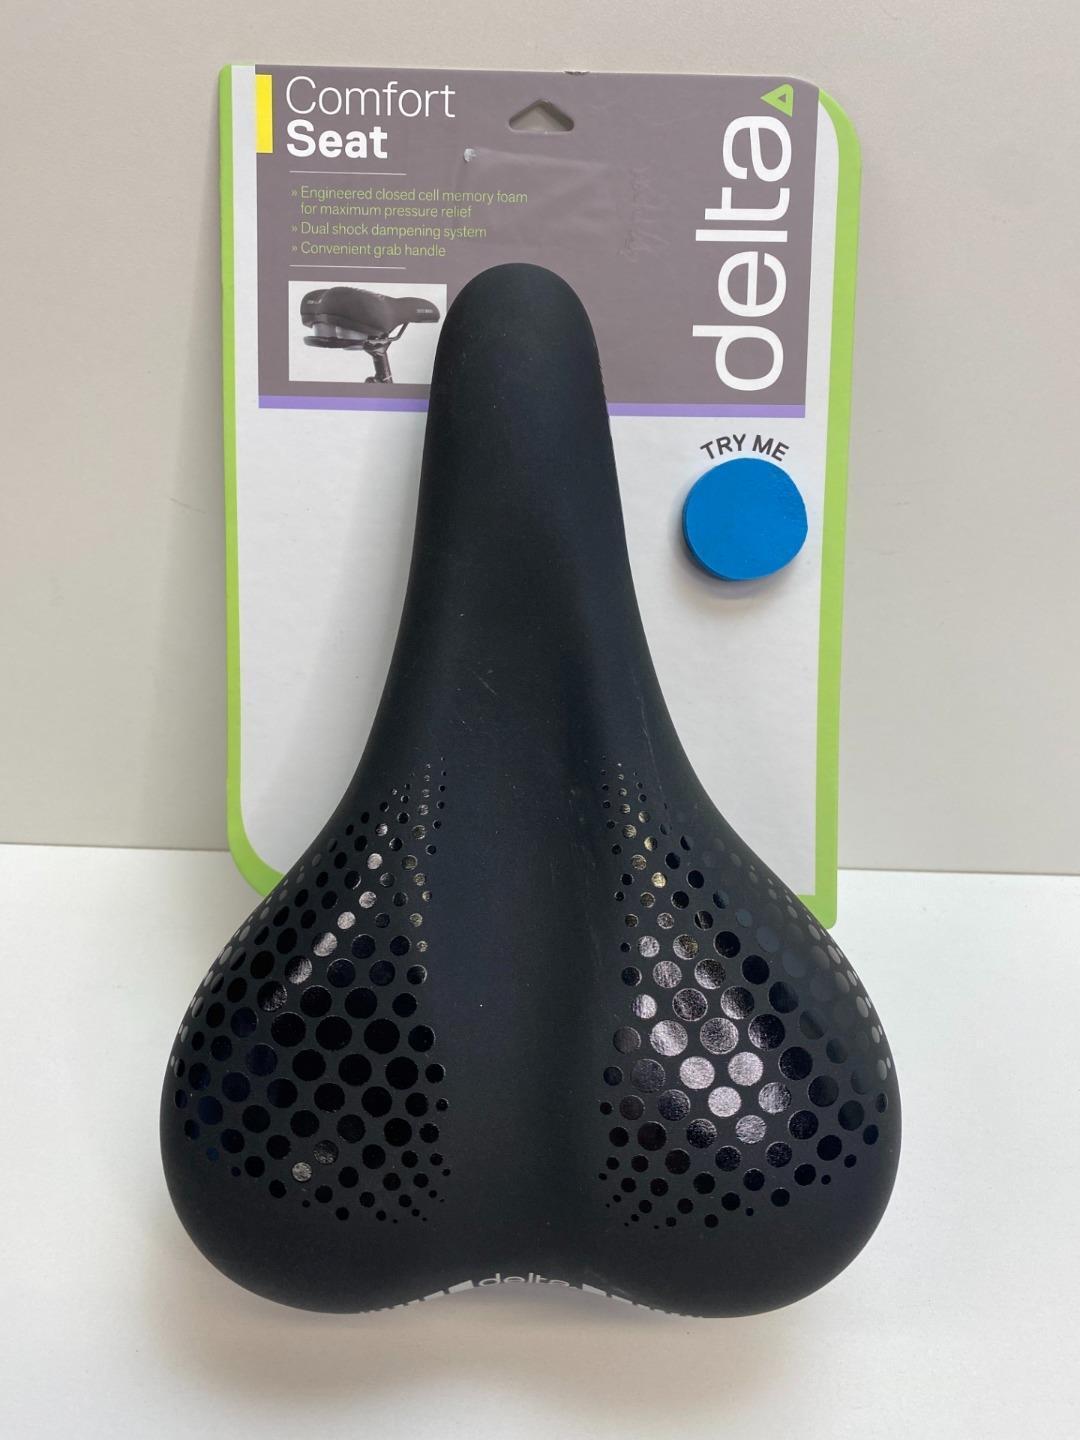 NEW Delta bicycle COMFORT SEAT saddle 170mm wide MEMORY FOAM black SS1000